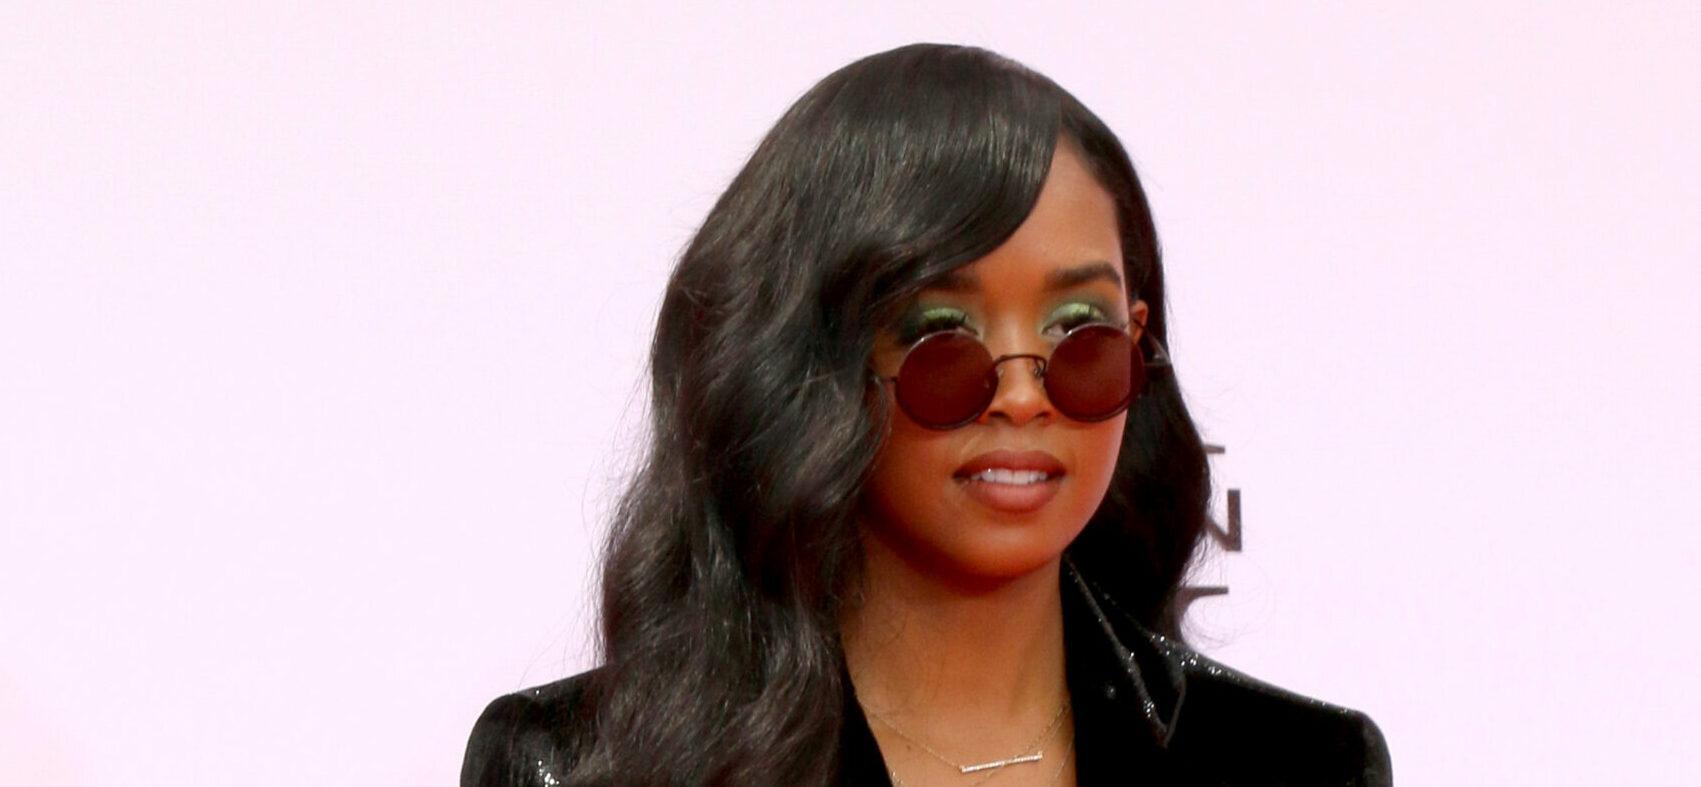 Singer H.E.R. Takes The Lead In Nominations At The 2021 BET Soul Train Awards